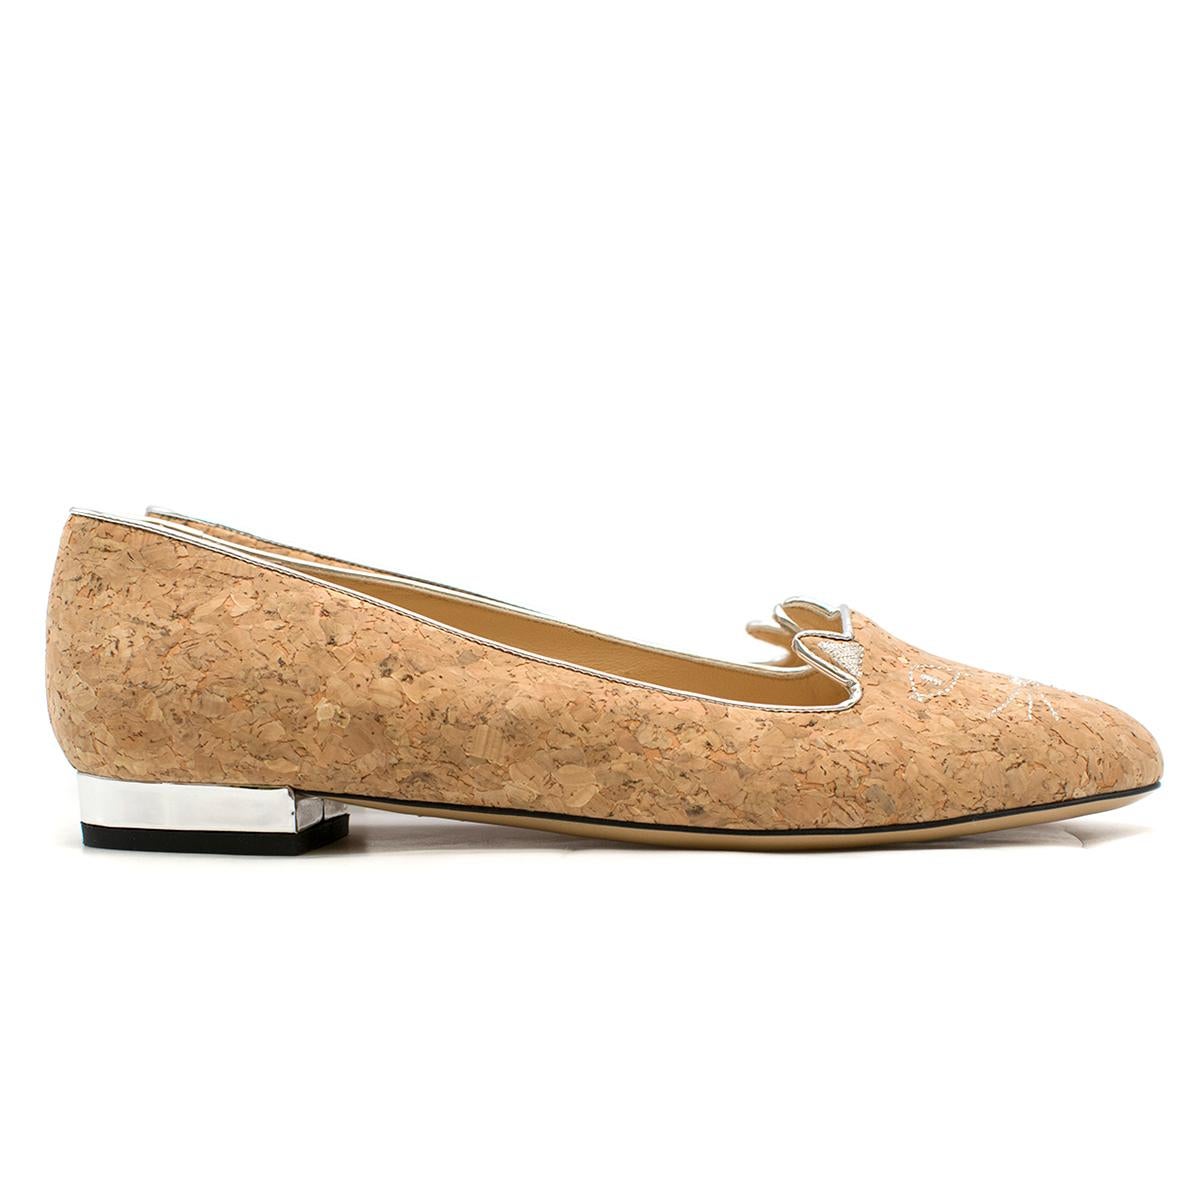 Charlotte Olympia Kitty Cork Loafers

- Kity flats in cork 
- Round toe
- Cat design to the toe ares
- Slip-on style
- Nude leather insole and sole
- Small Silver heel

This item comes with the original dust bag.

Please note, these items are